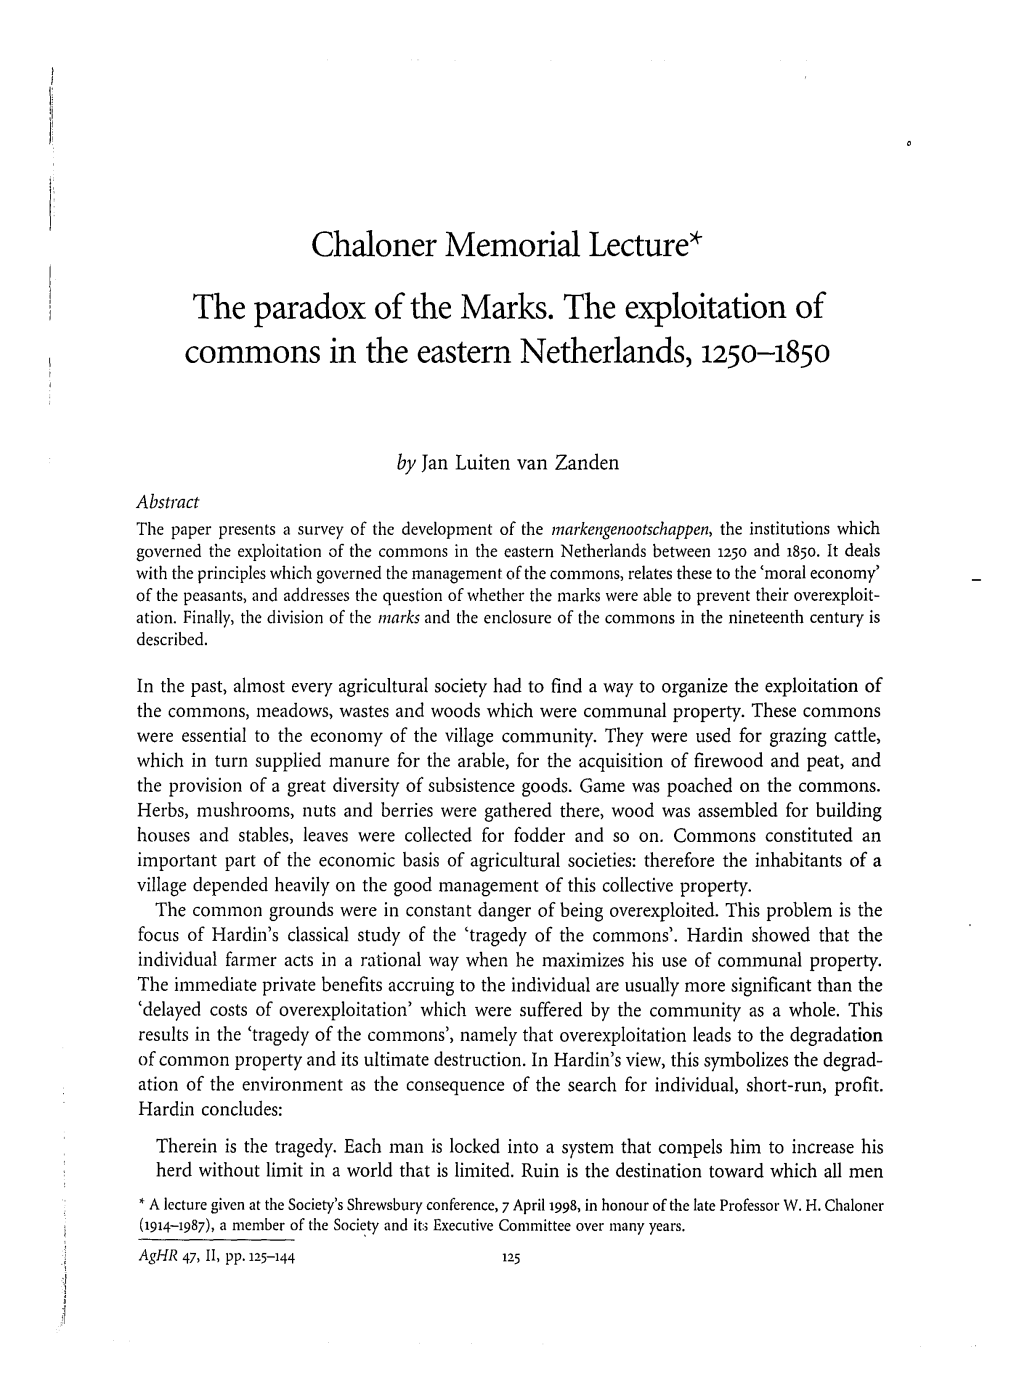 The Paradox of the Marks. the Exploitation of Commons in the Eastern Netherlands, 125O-185O